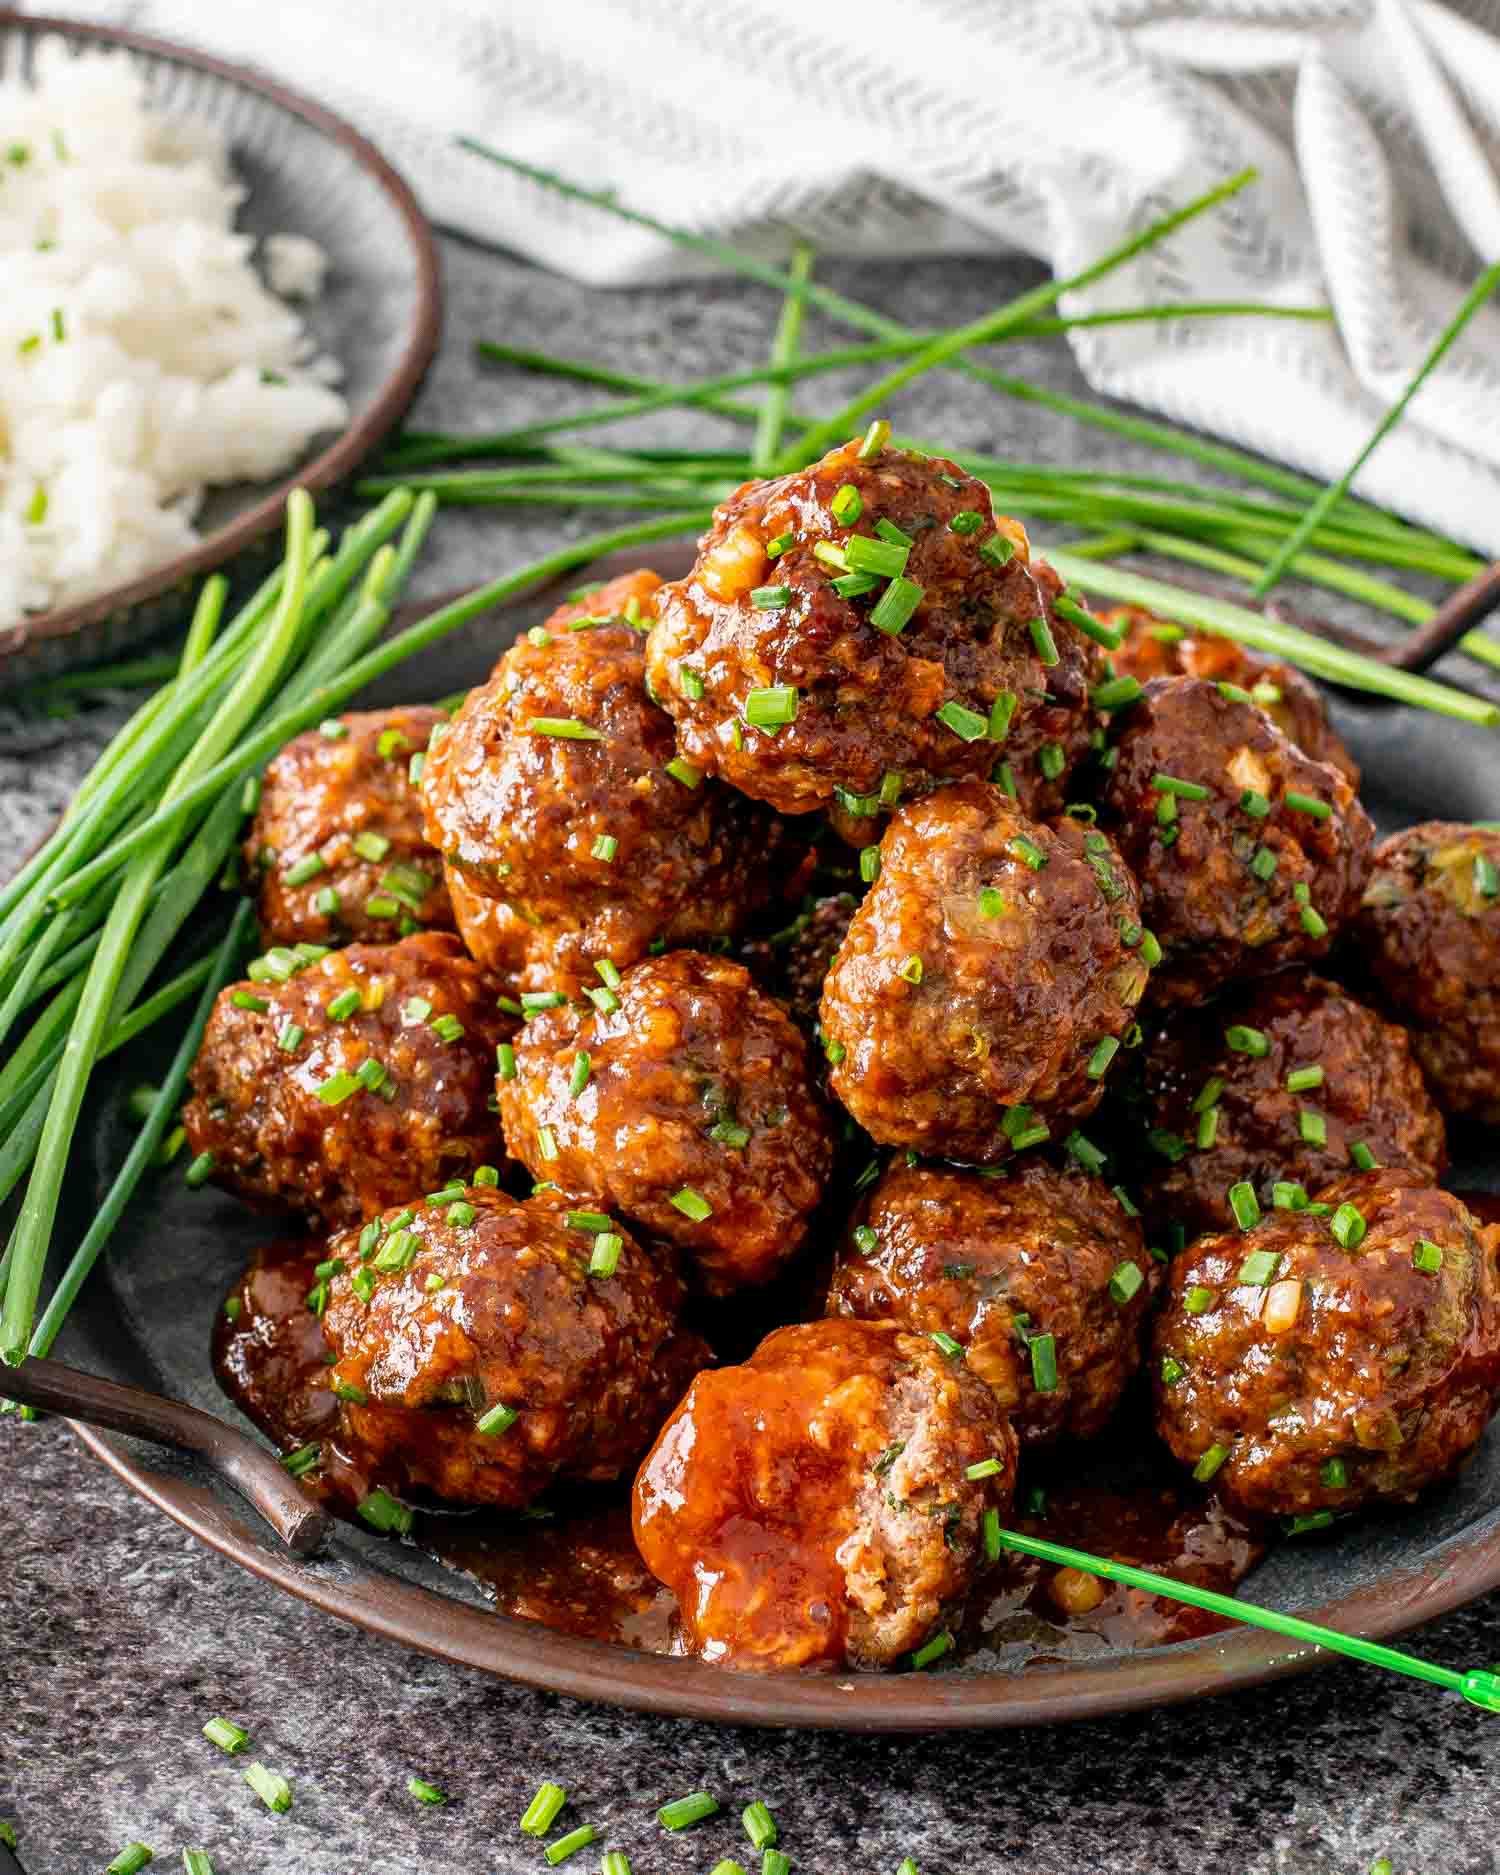 korean meatballs on a metal plate garnished with chives.